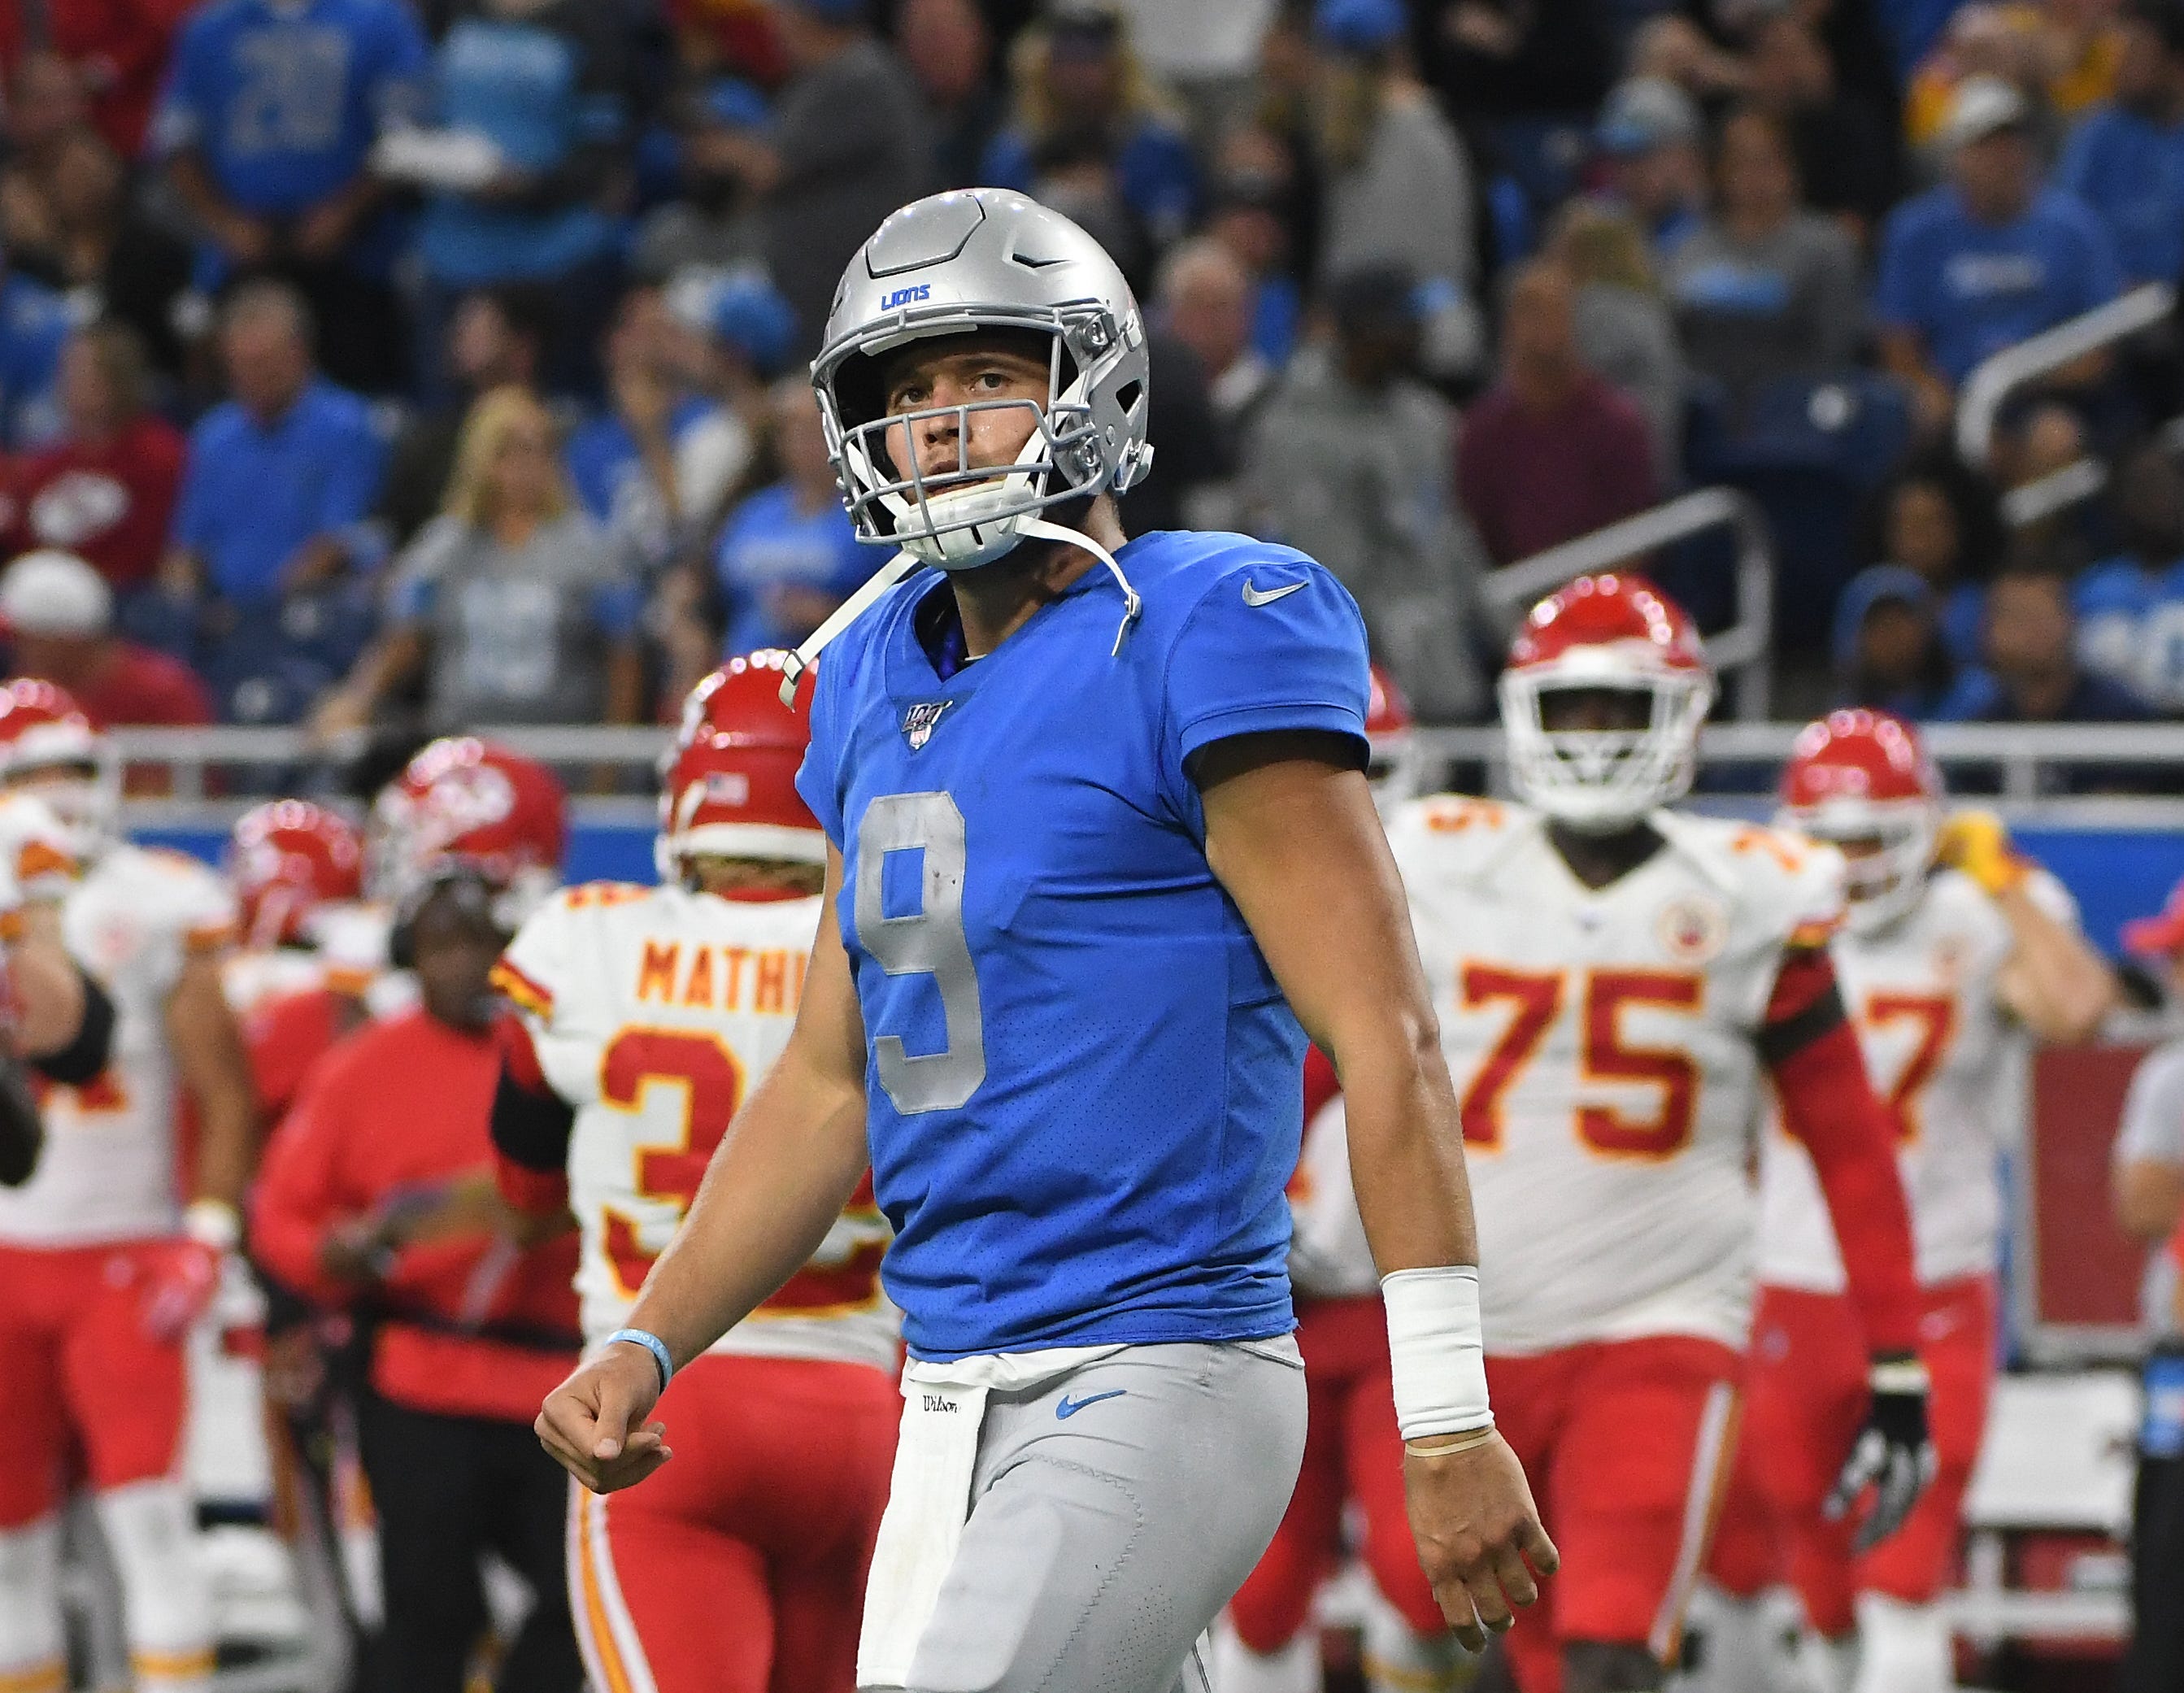 Lions quarterback Matthew Stafford walks off the field after fumbling away the ball in the red zone, with the Chiefs recovering, in the third quarter of a 34-30 loss on Sunday, Sept. 29, 2019, at Ford Field in Detroit.